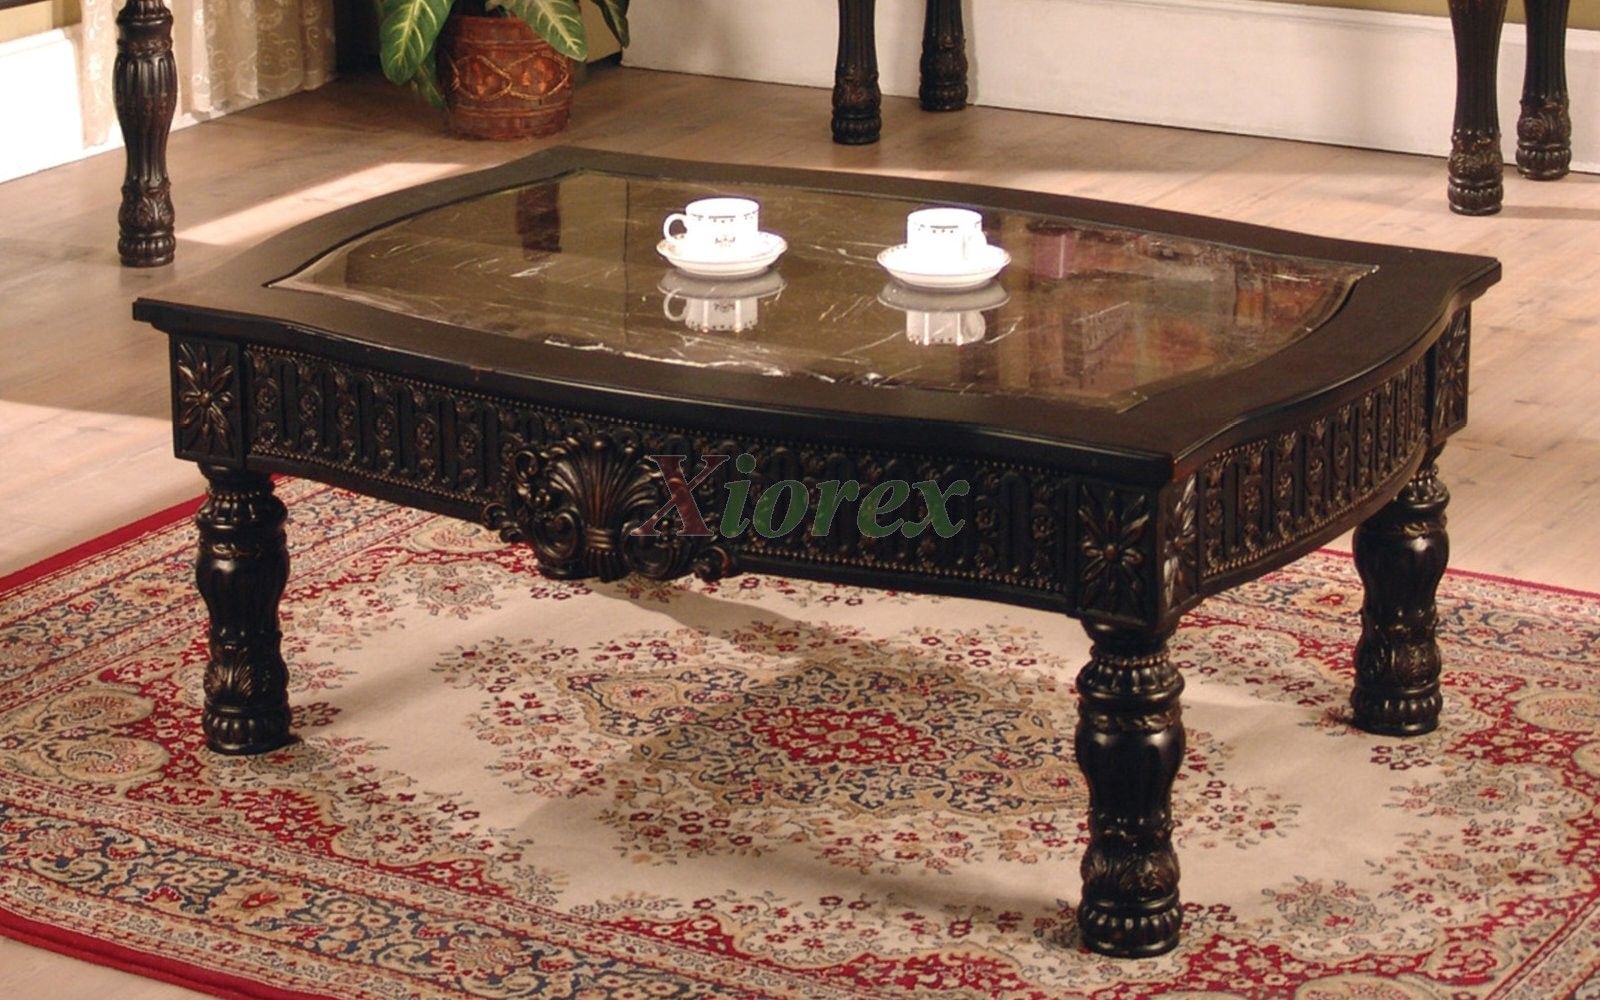 Ajax Rectangle Coffee Table With Faux Marble Top Inlay | Xiorex Within Faux Marble Top Coffee Tables (View 14 of 20)